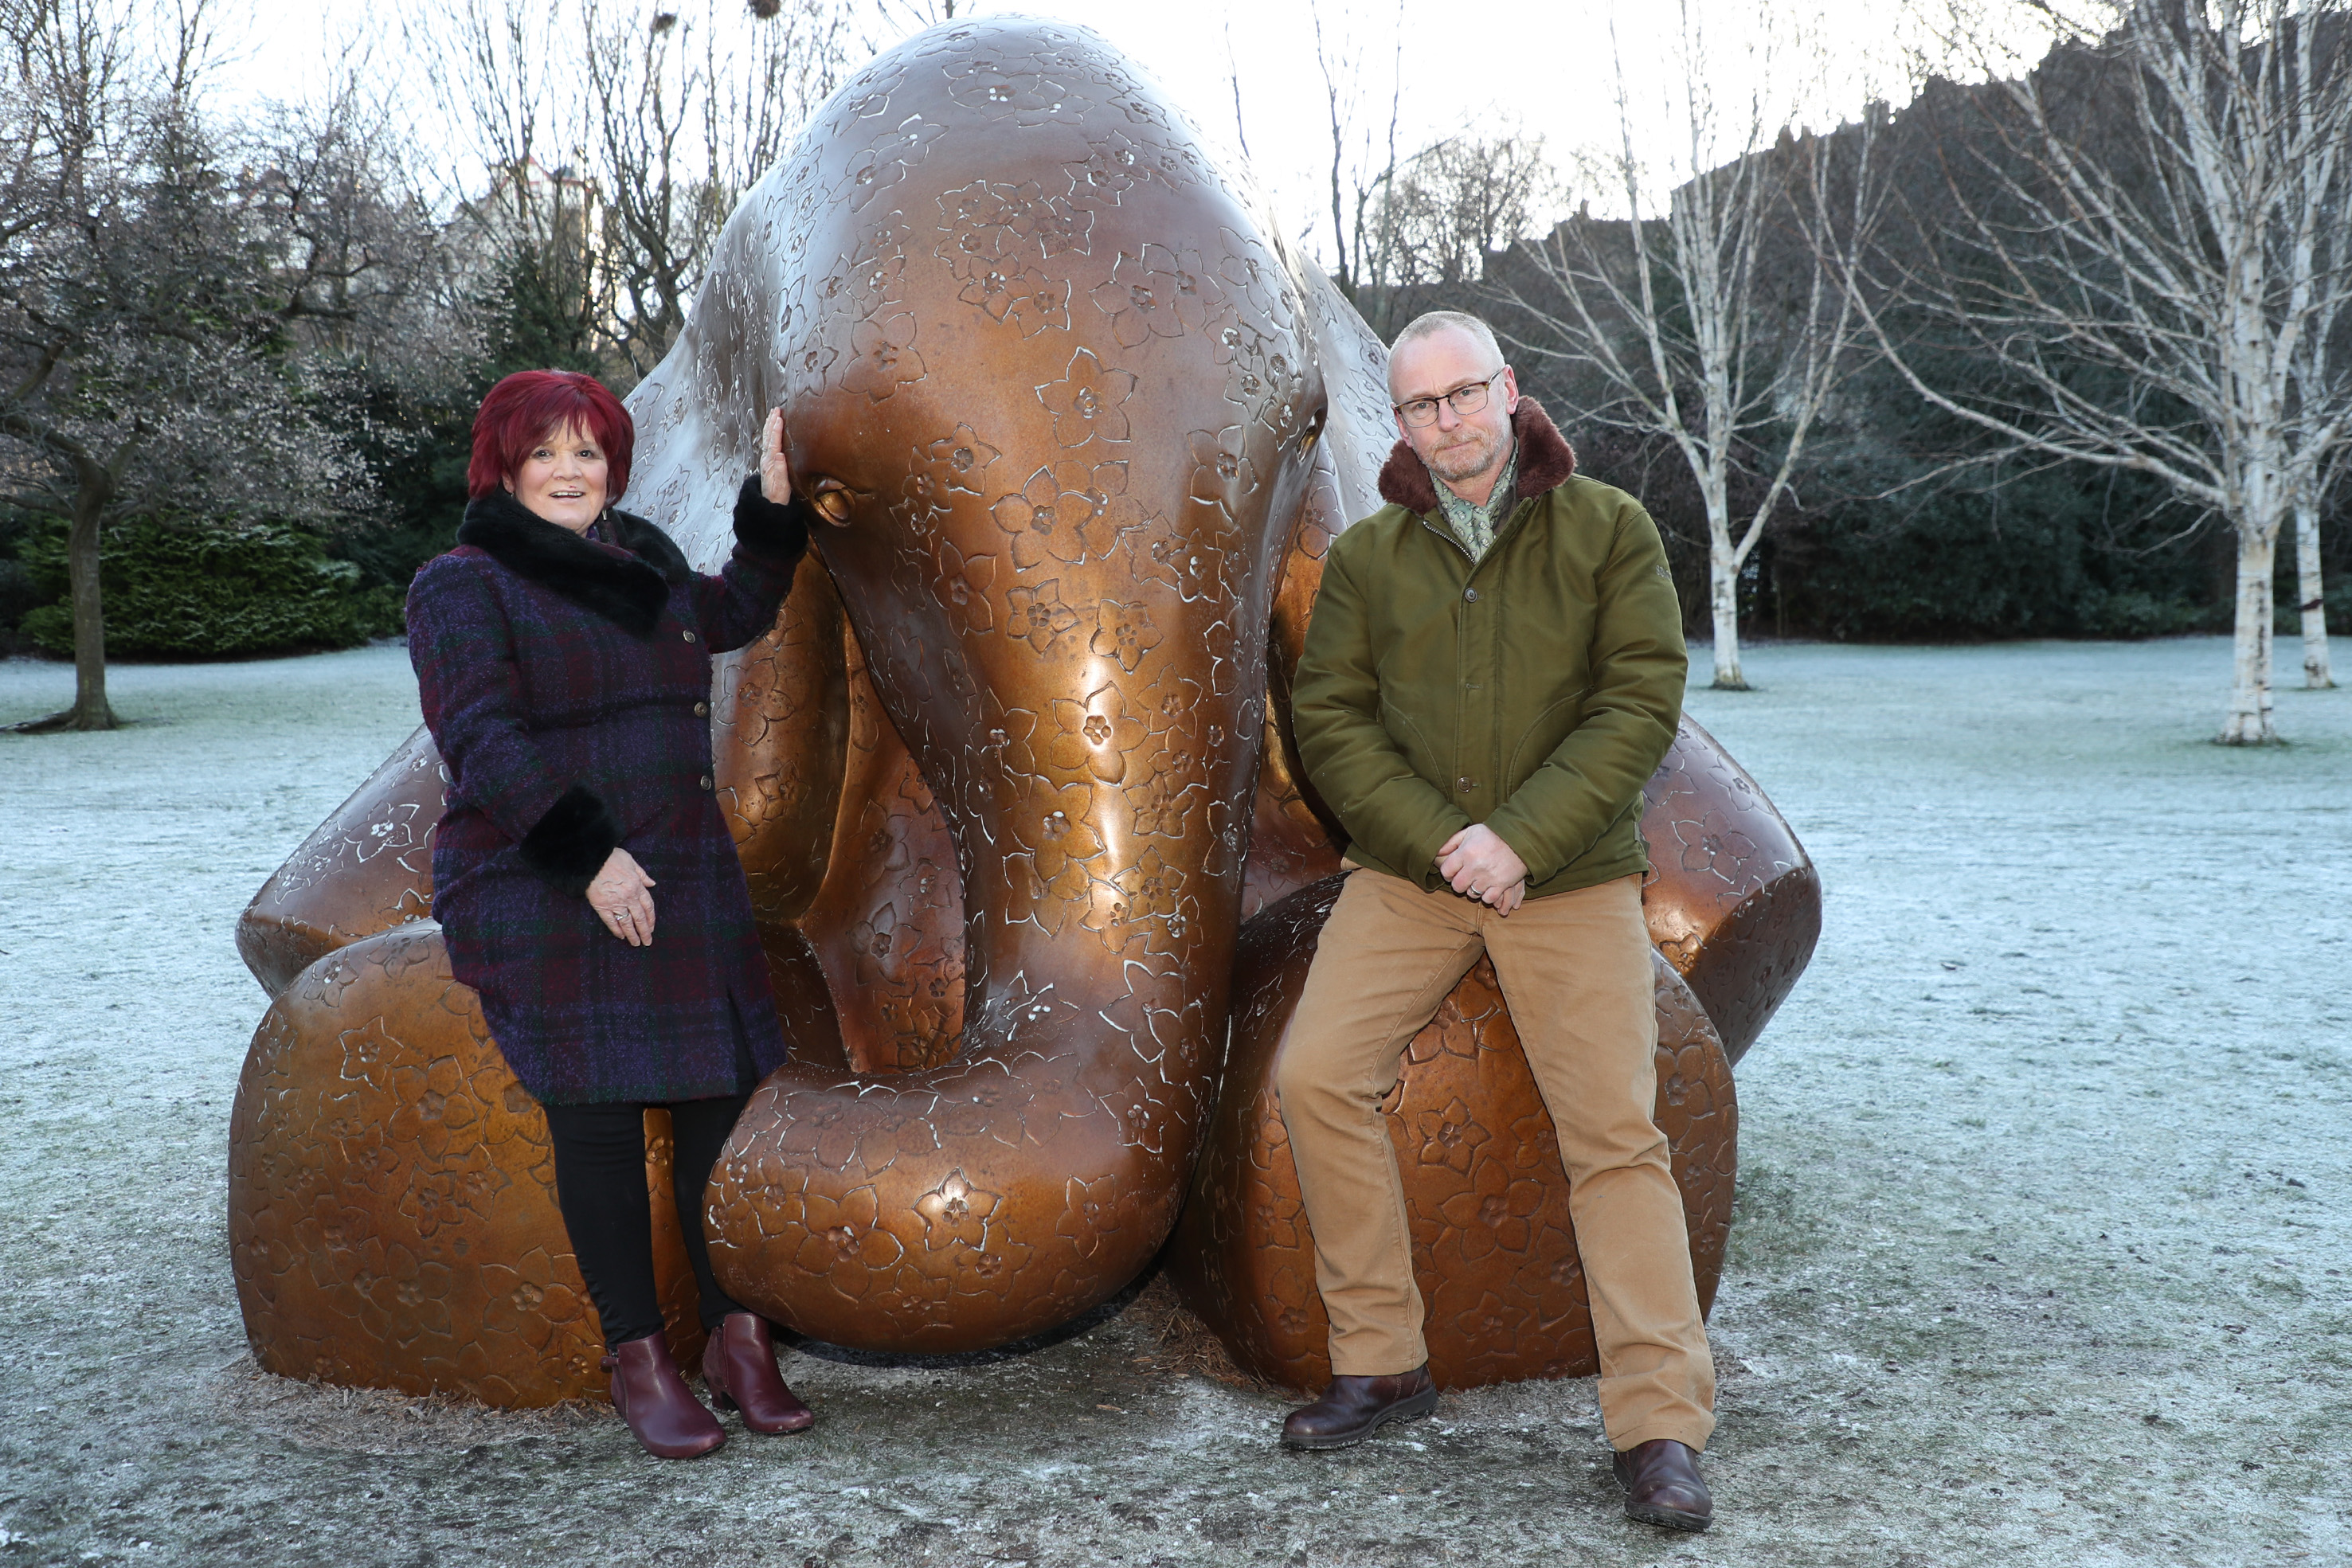 Parent Dorothy Maitland and Sculptor Andy Scott with the Mortonhall baby elephant sculpture at the official unveiling ceremony for parents on Saturday morning in Princes Street Gardens, Edinburgh. (Stewart Atwood).